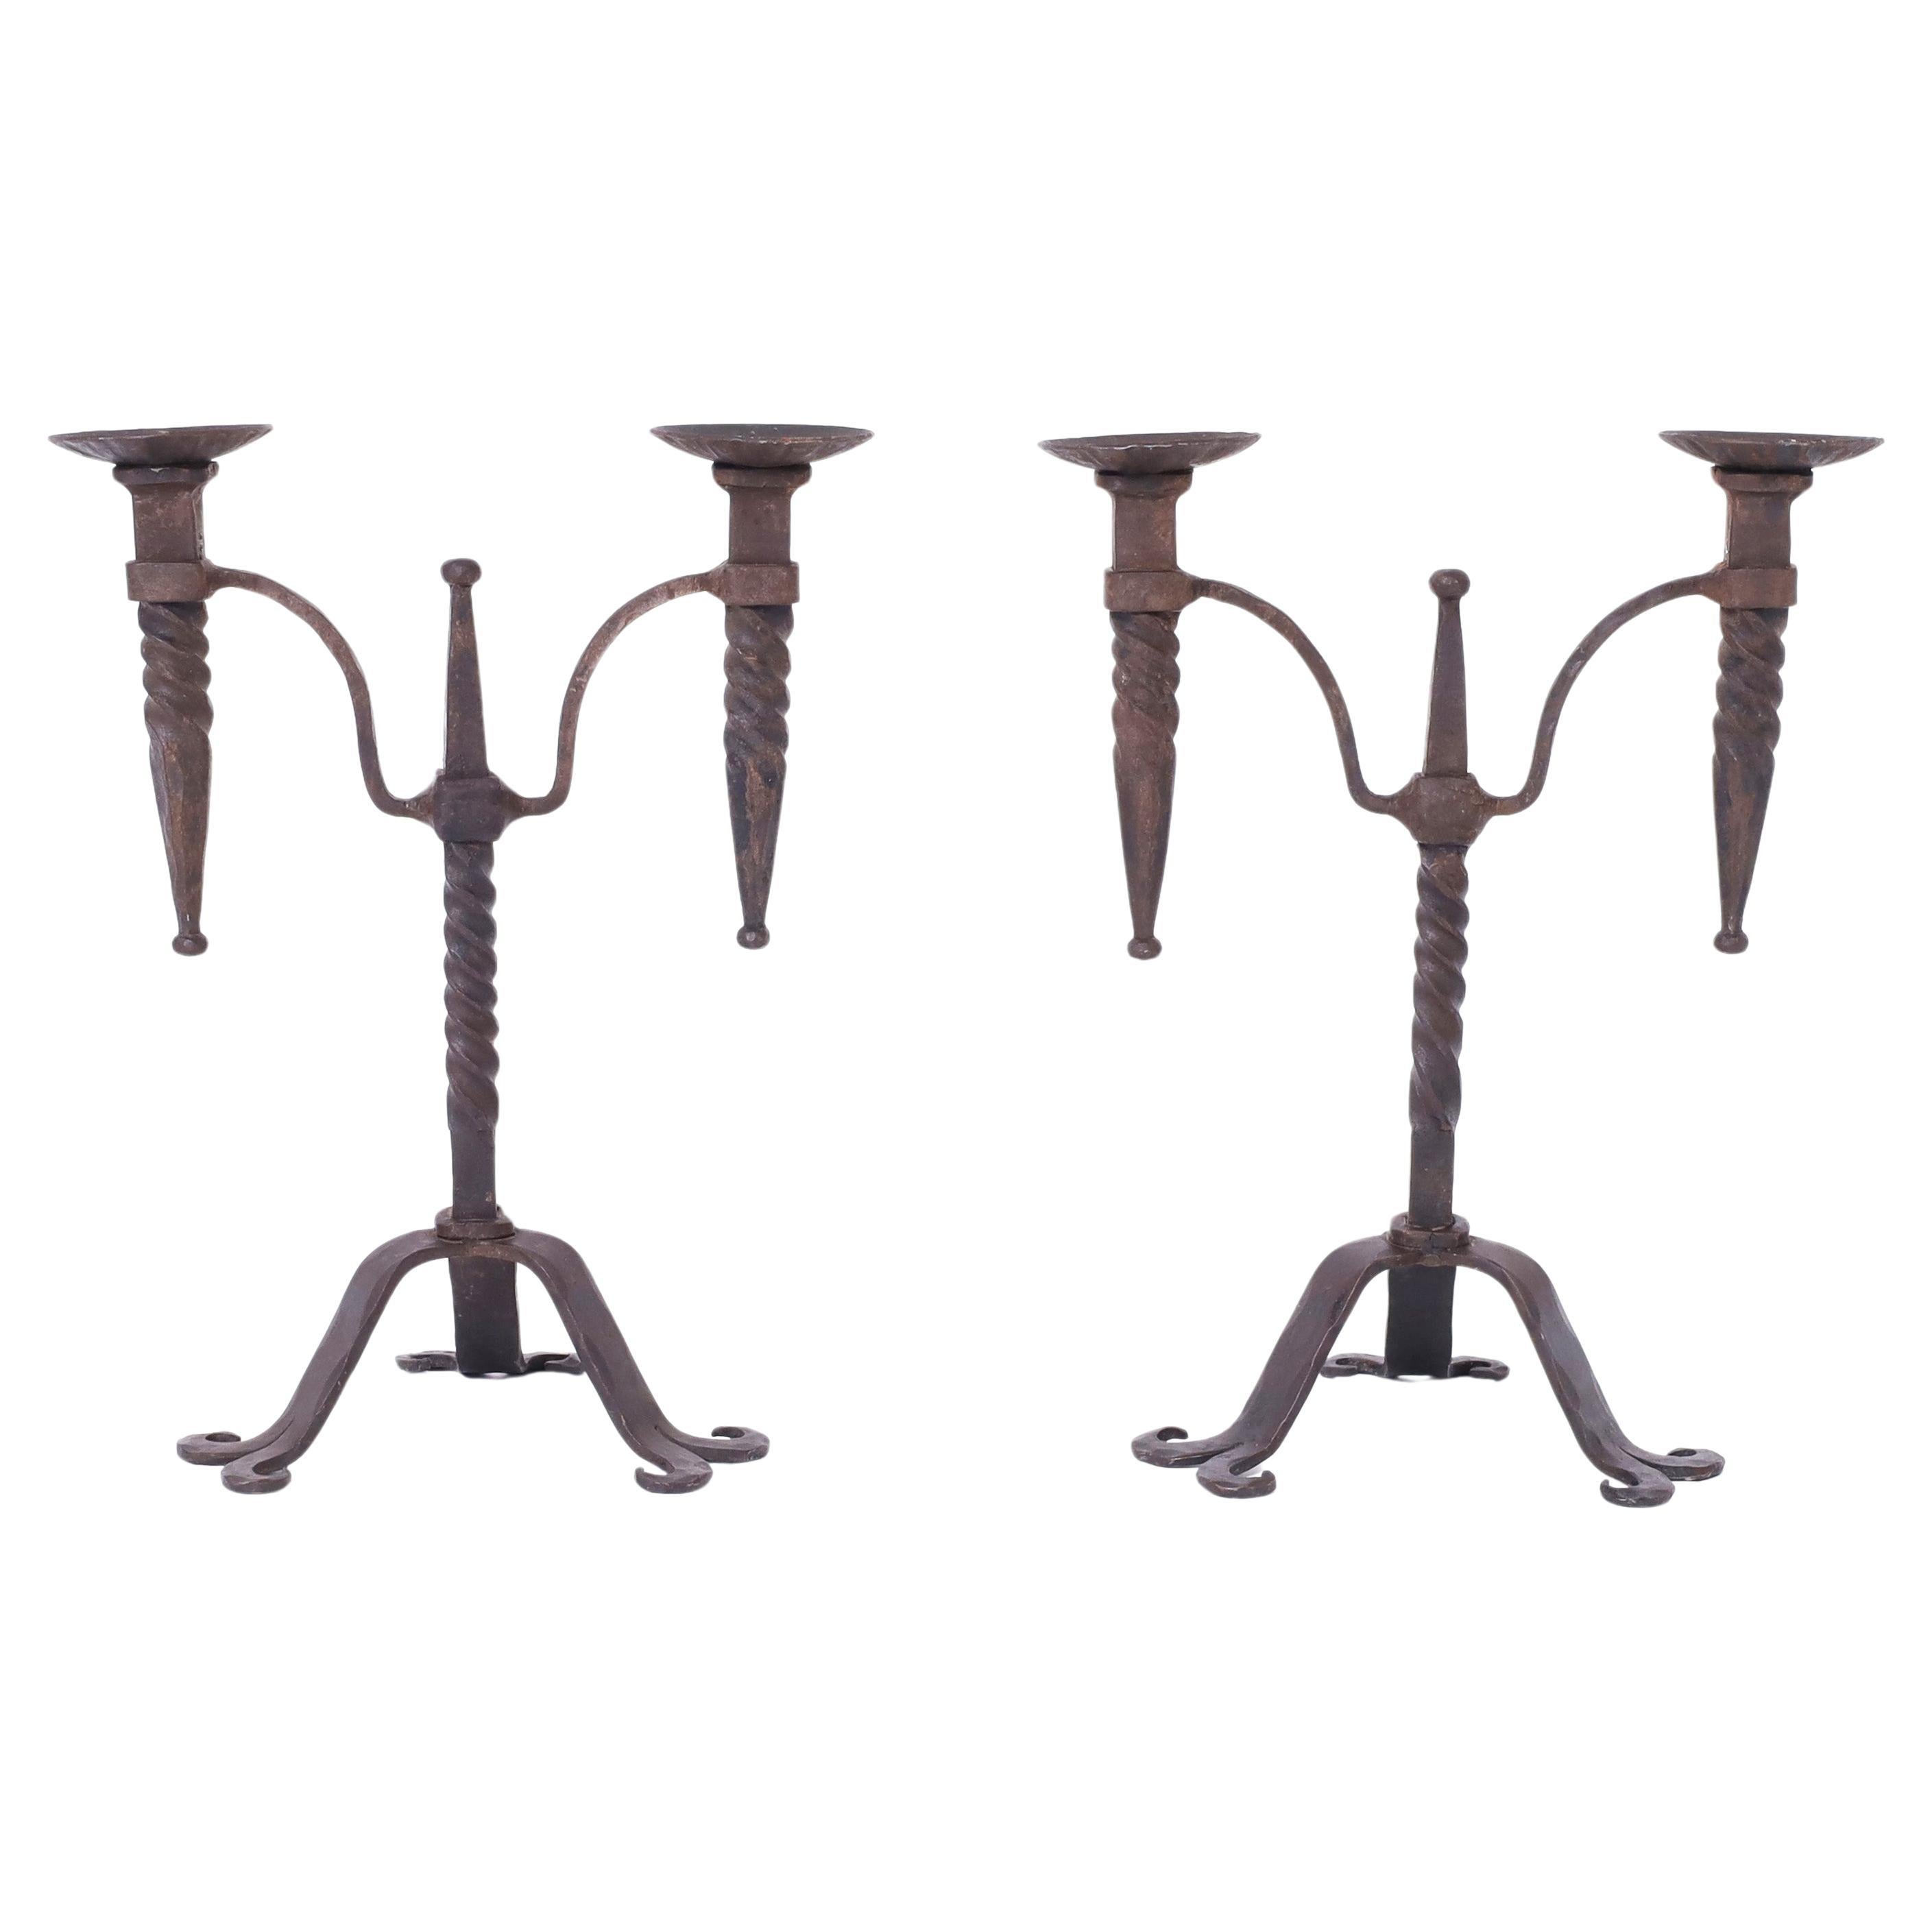 Pair of Antique French Iron Candle Sticks For Sale